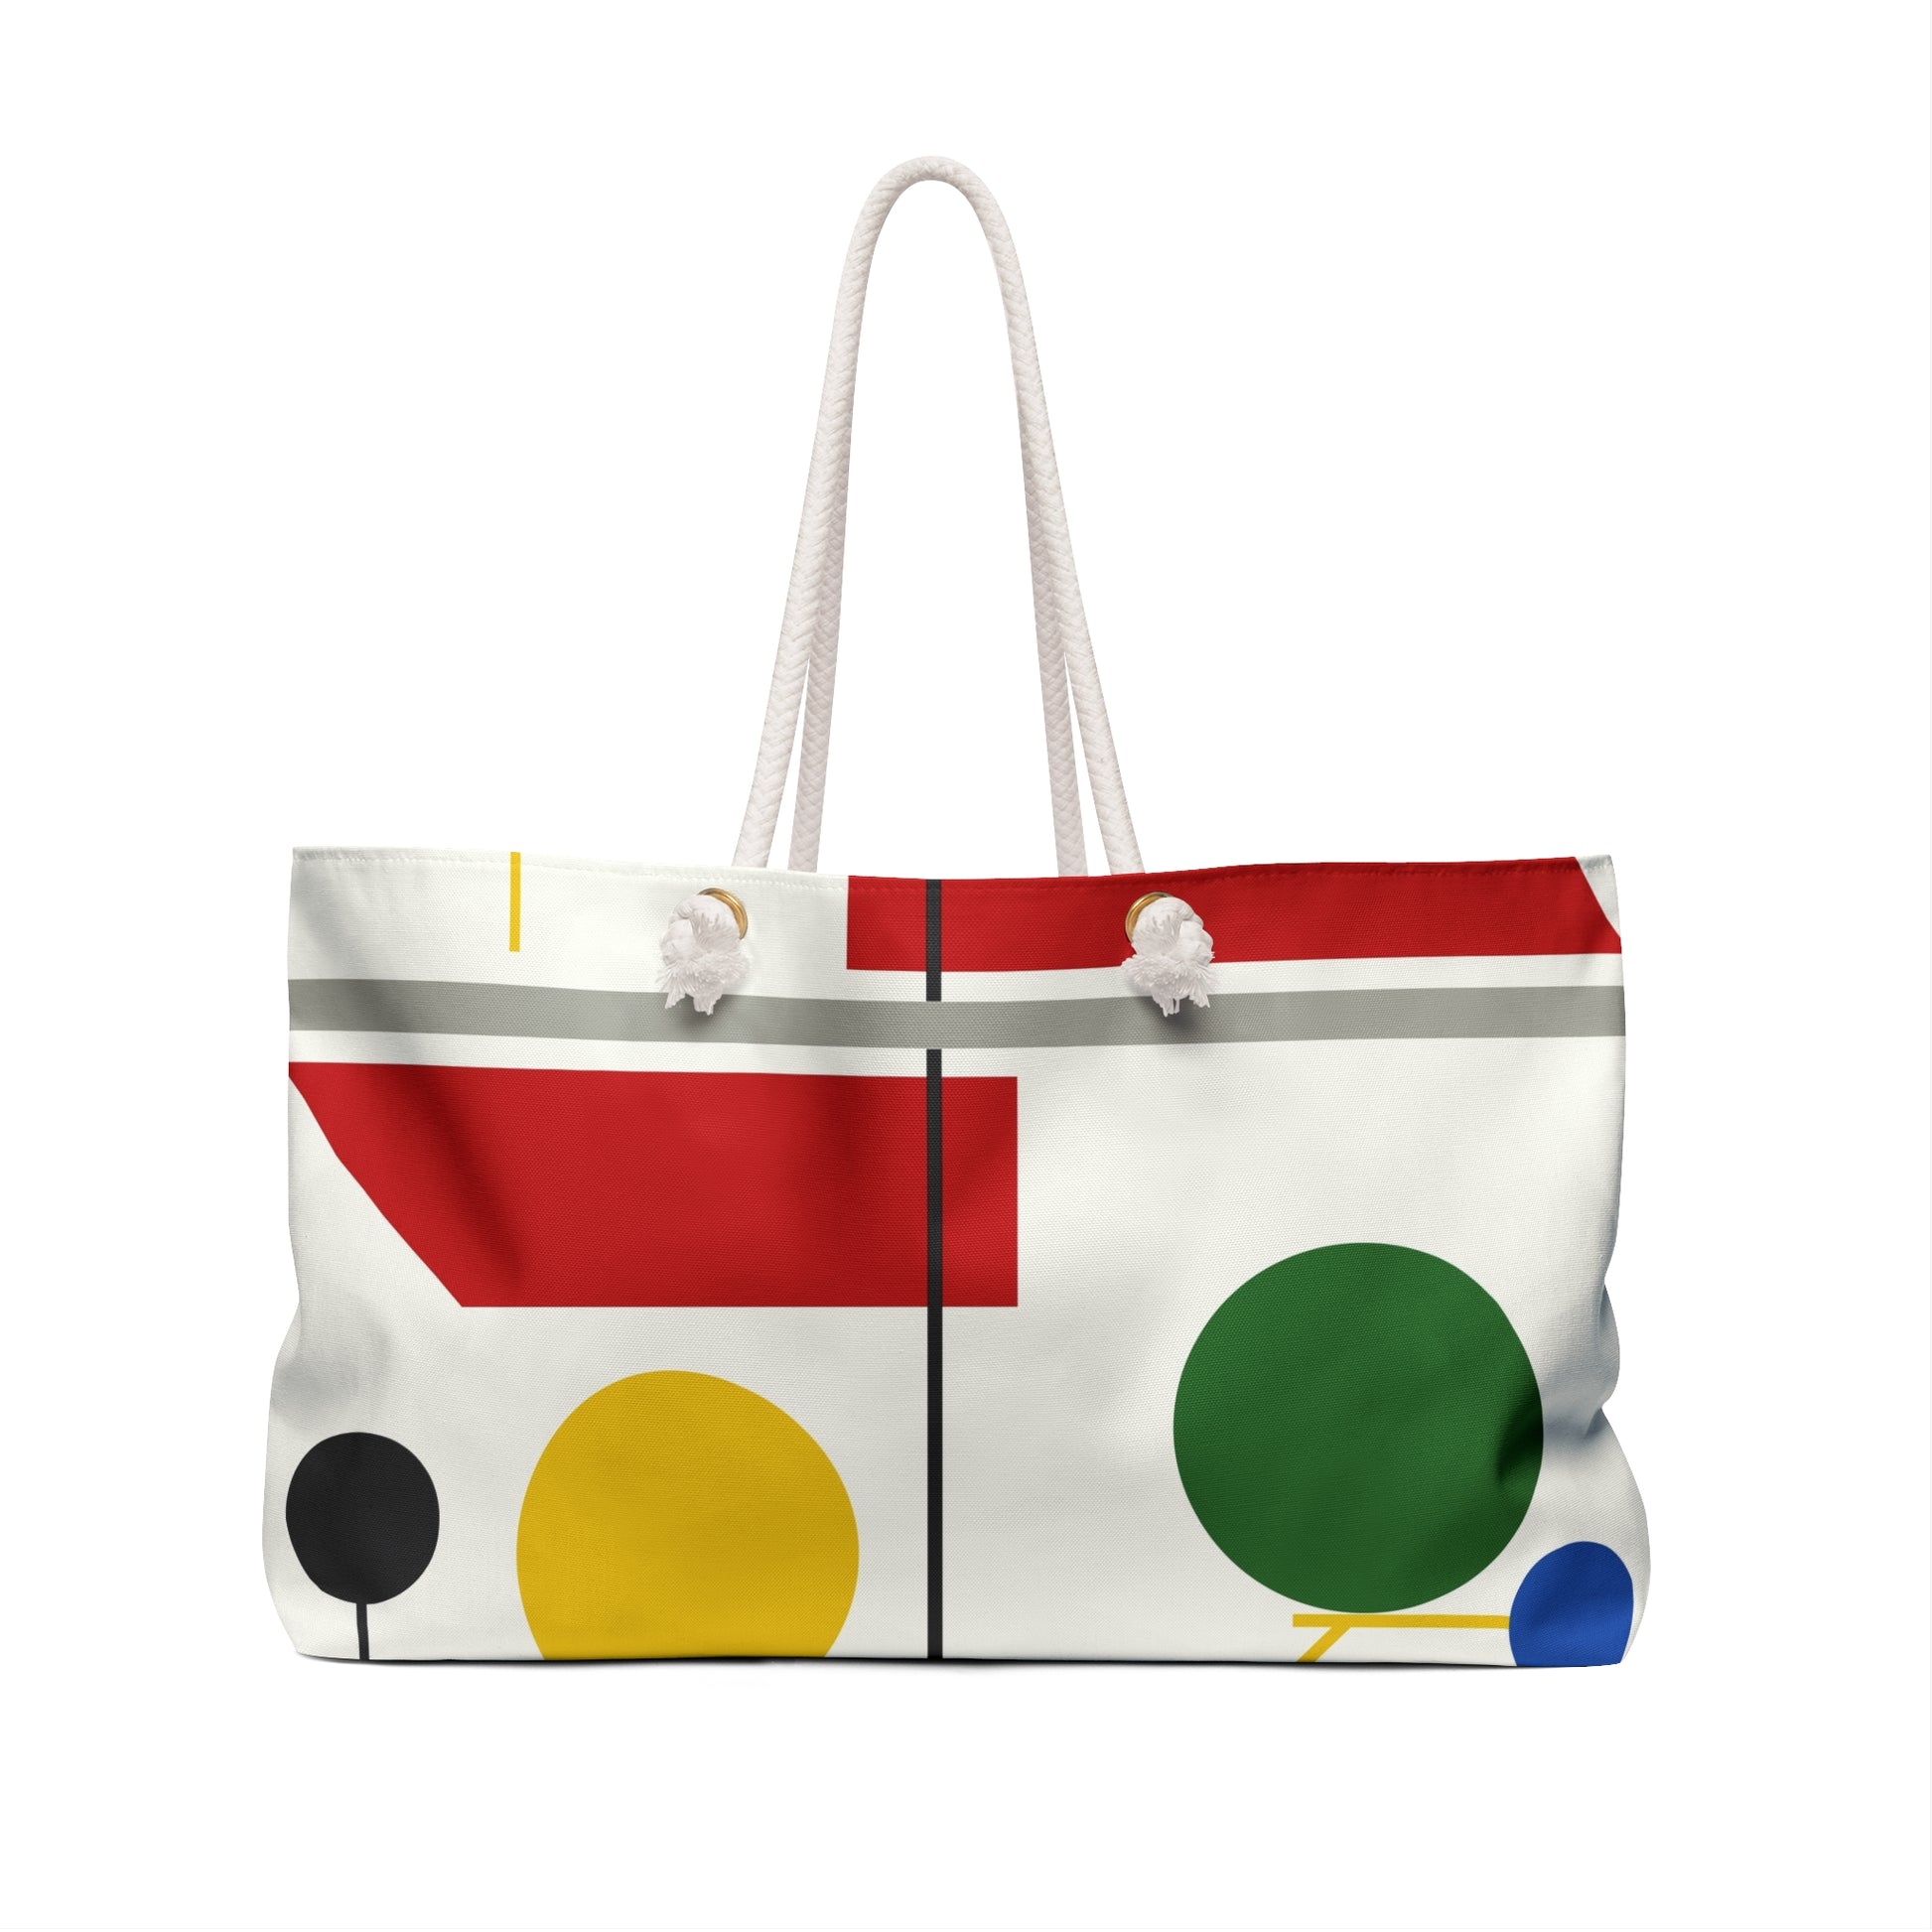 MYRIAM THYES - FOUR SPACES WITH PLANES, CIRCLES AND CROSS - WEEKENDER TOTE BAG